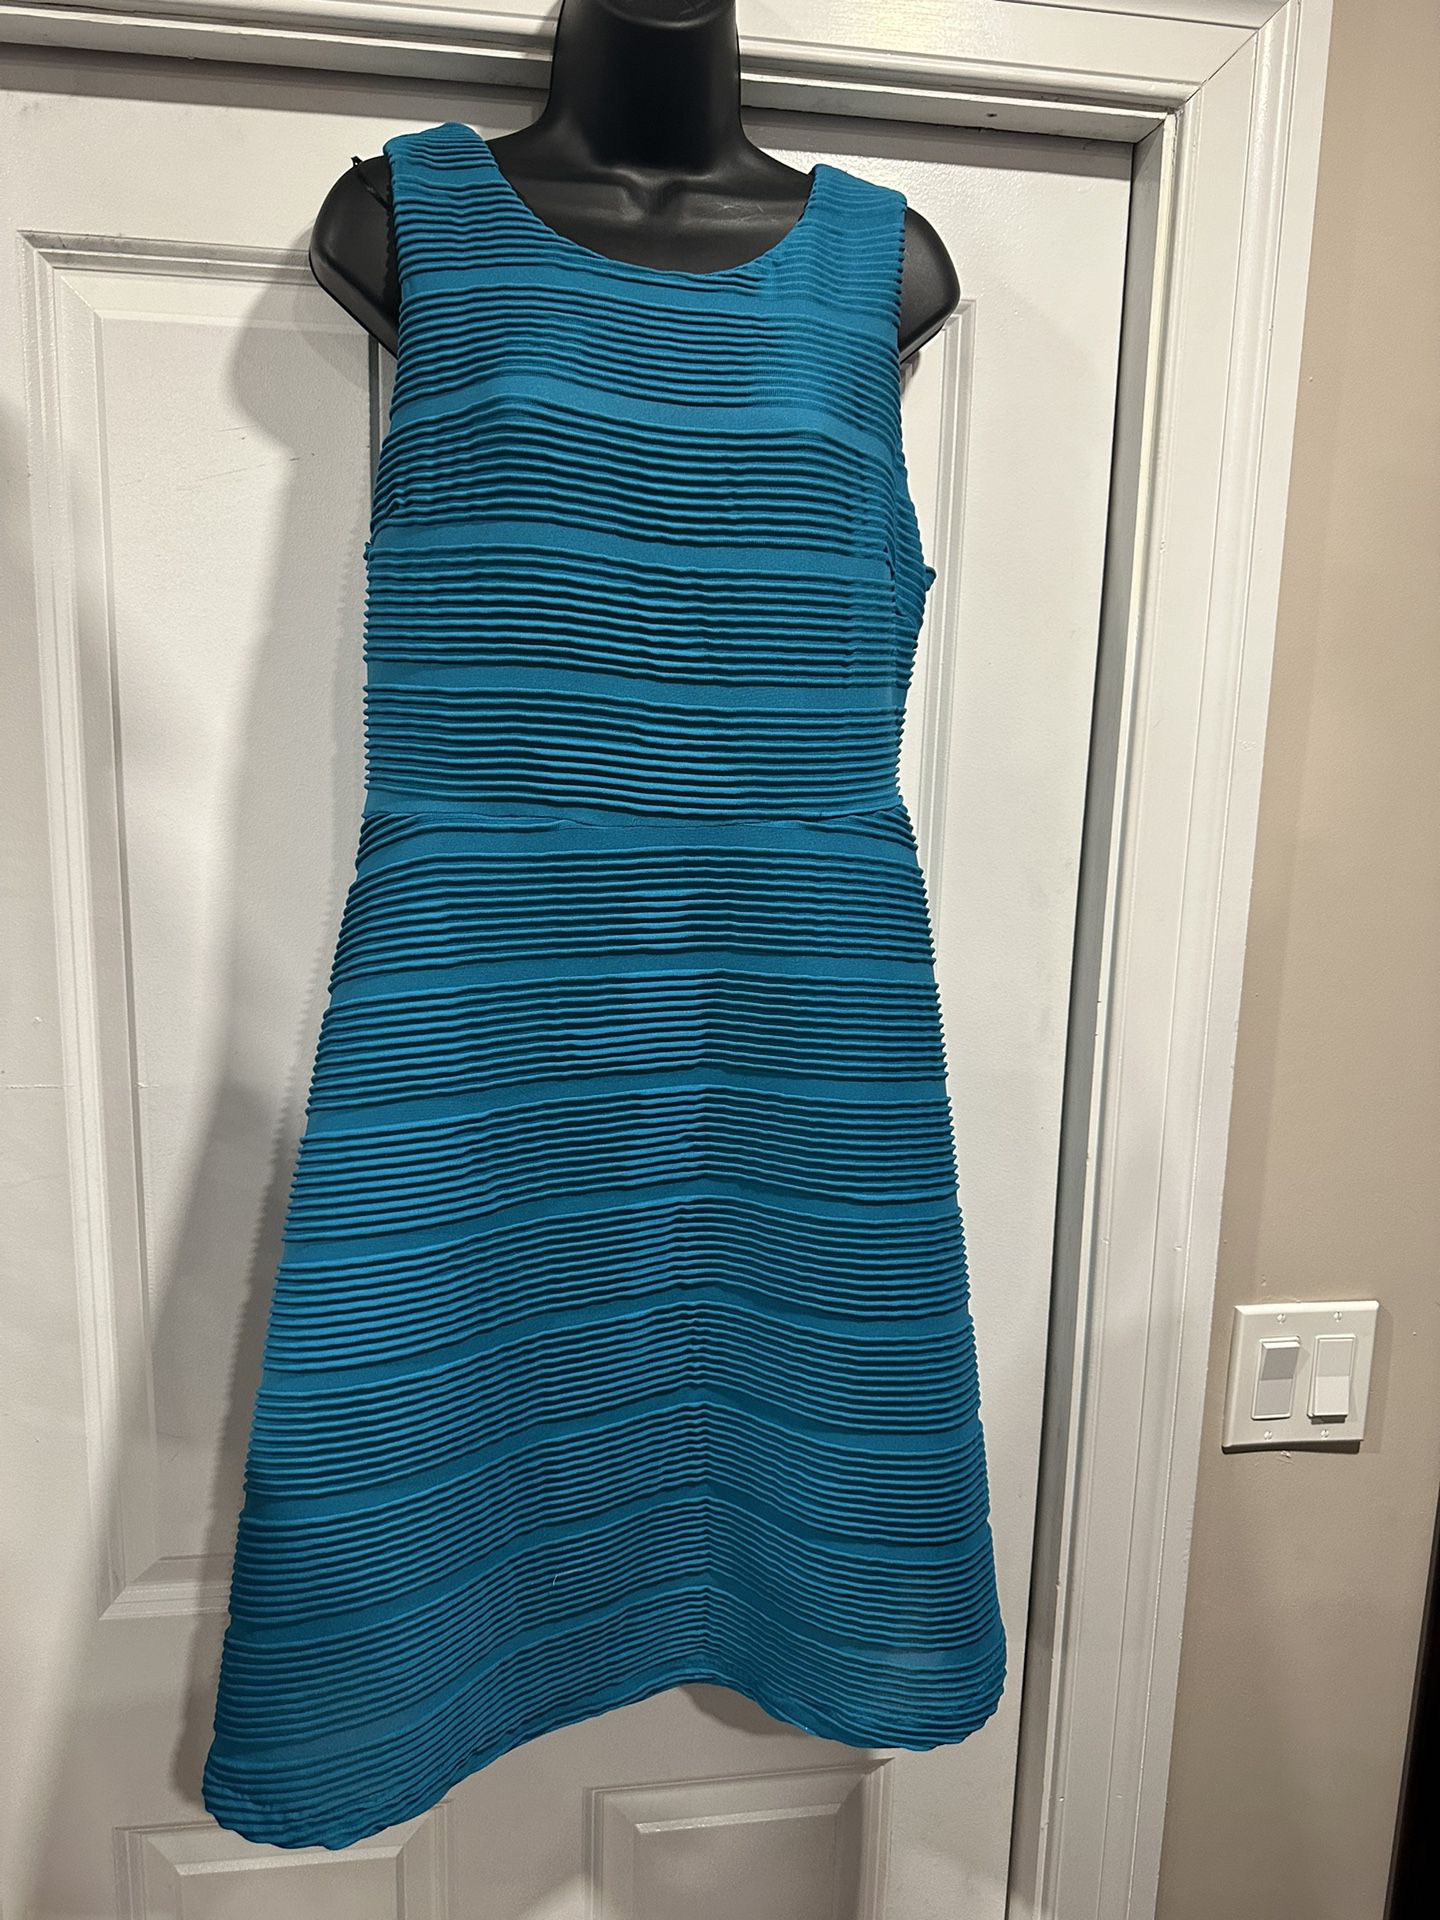 Chic Teal Pleated Dress with Keyhole Detail - Size 14